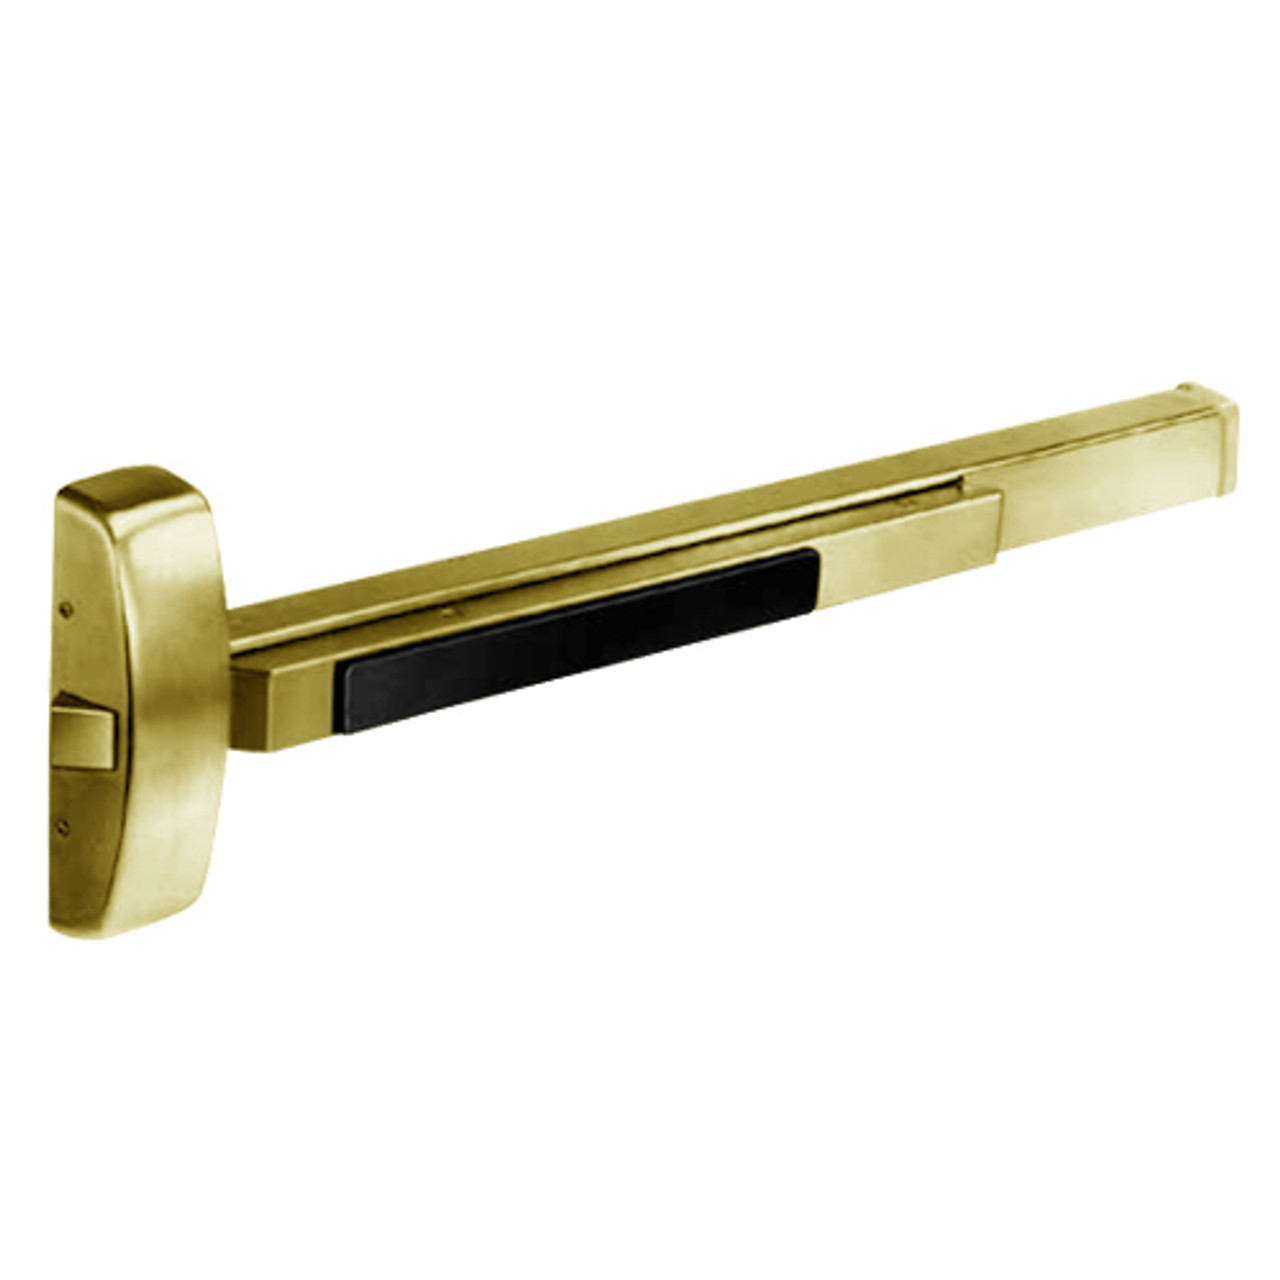 12-8810G-03 Sargent 80 Series Exit Only Fire Rated Rim Exit Device in Bright Brass